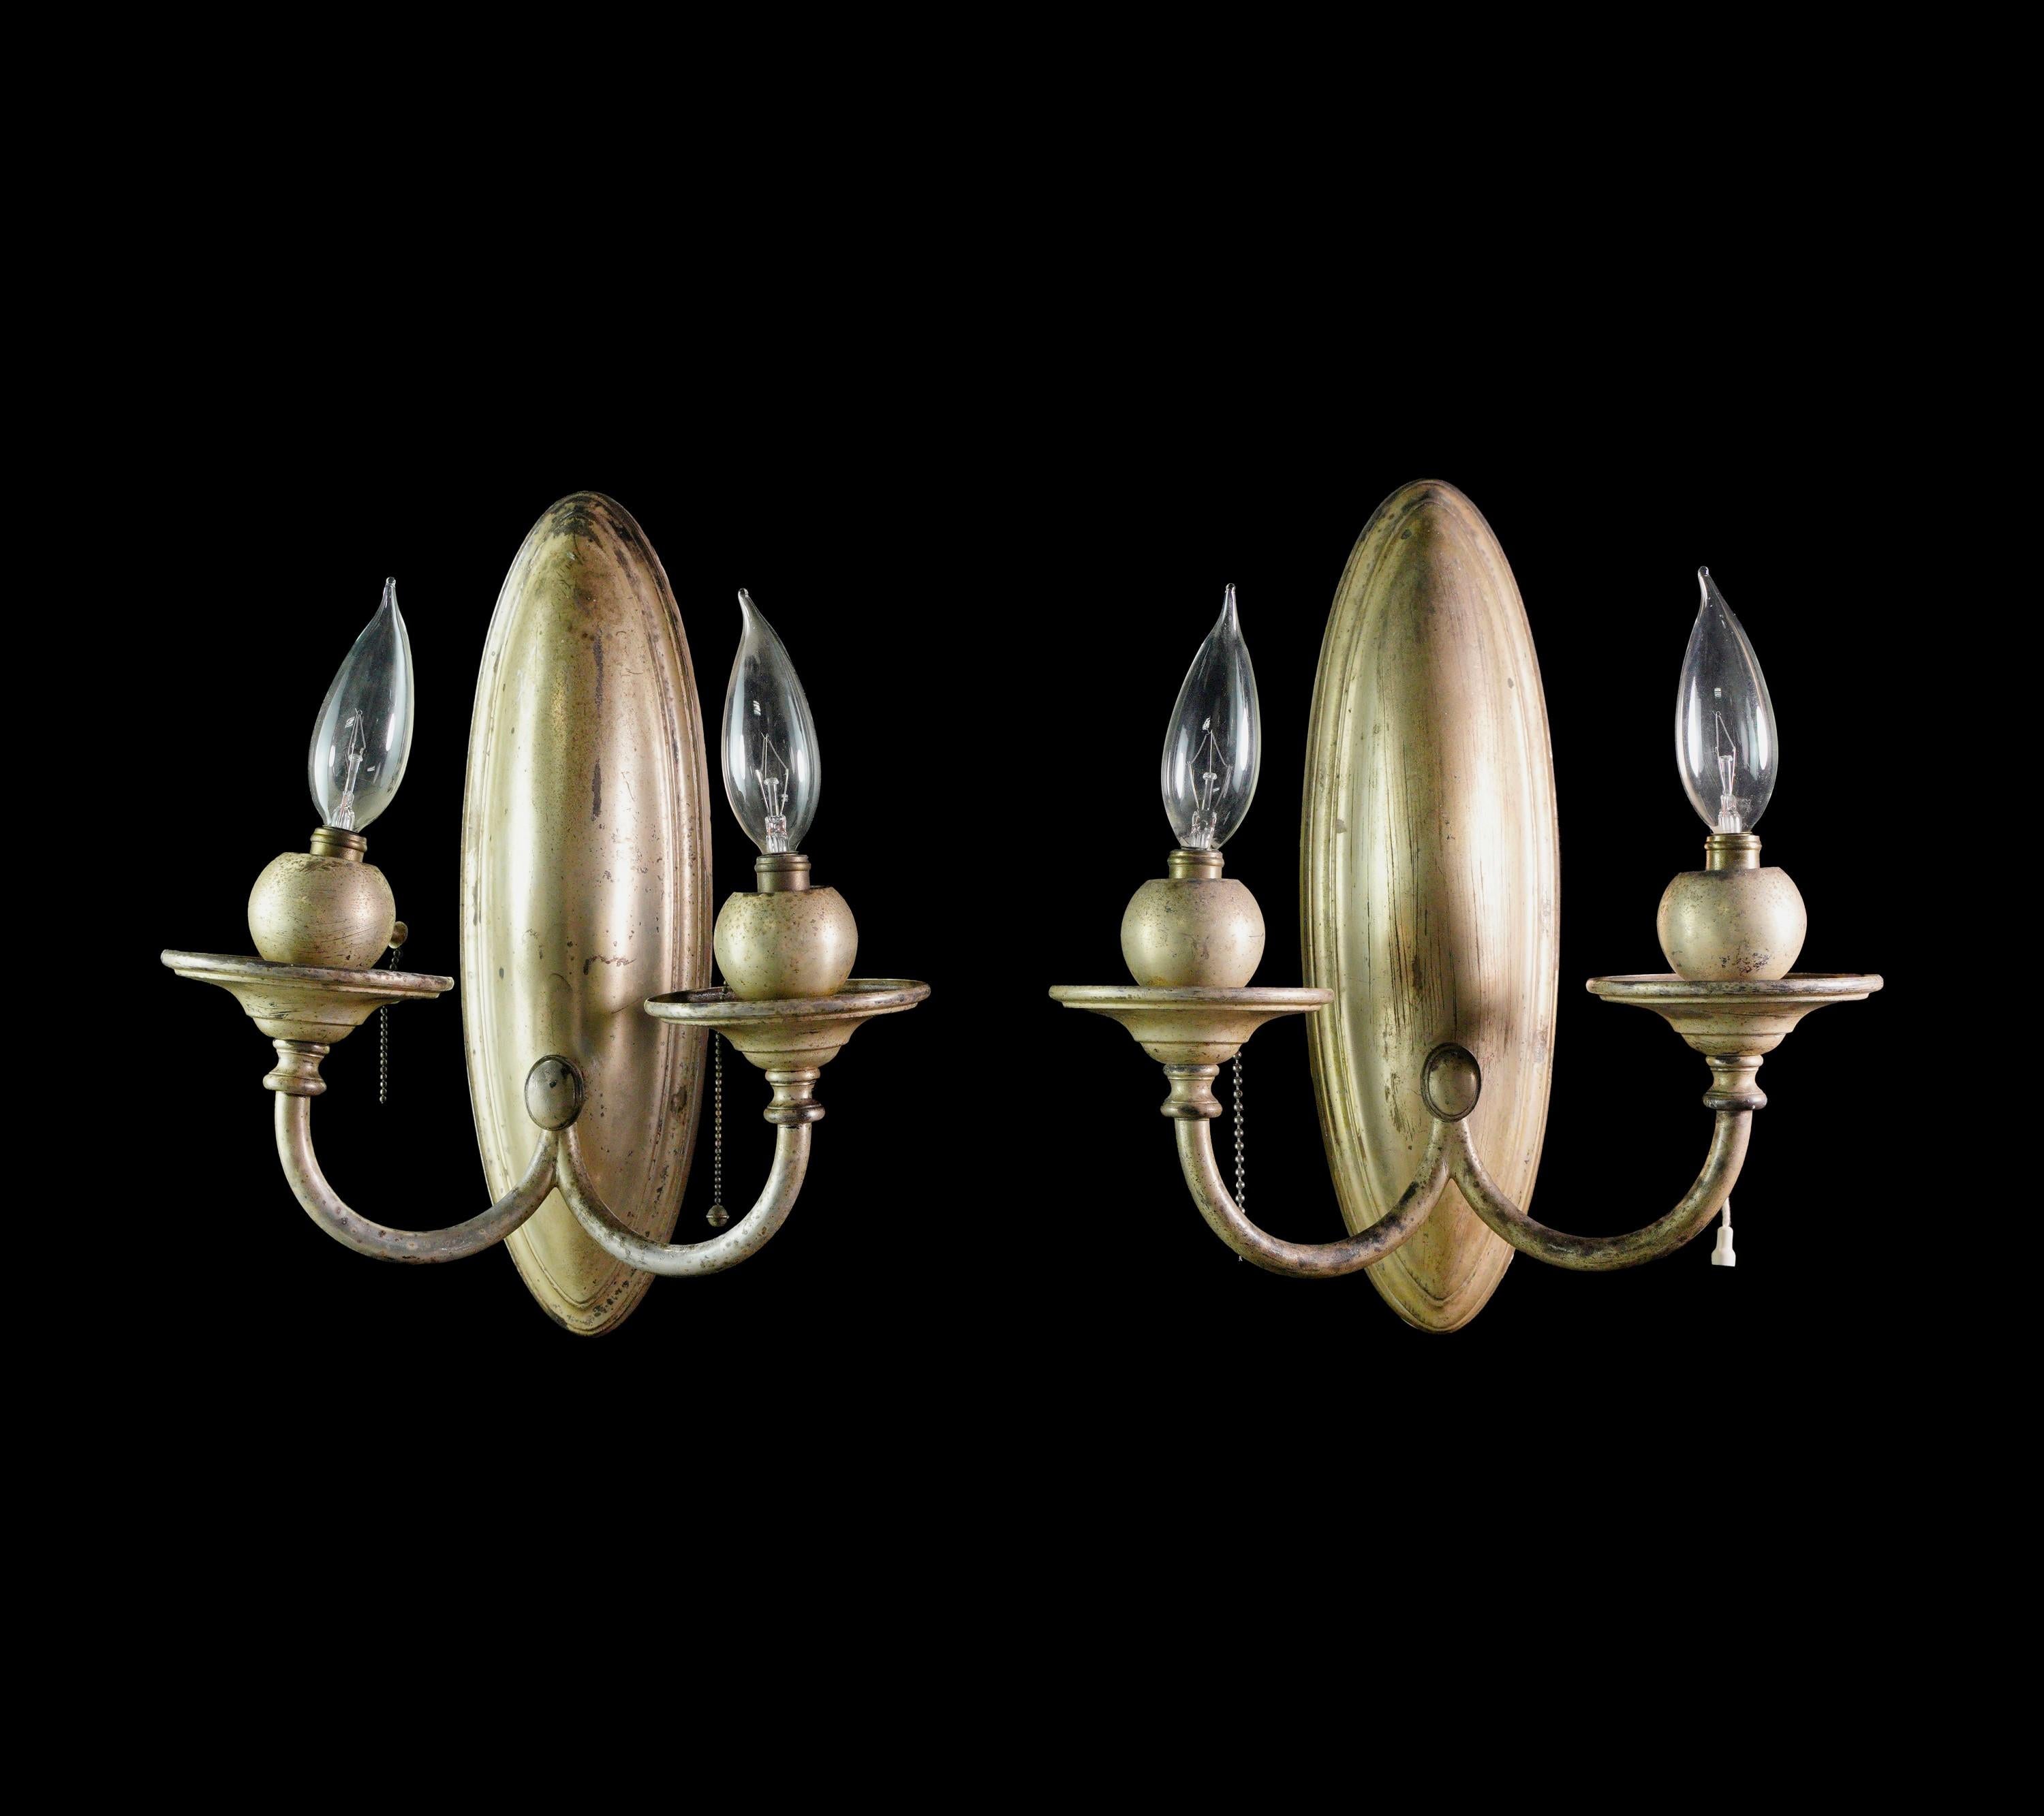 Illuminate your walls with the charm of our pair of antique Traditional Bradley & Hubbard silvered brass wall sconces. With two arms and exquisite silvered brass details, these sconces bring timeless elegance to your space. Cleaned and restored. 